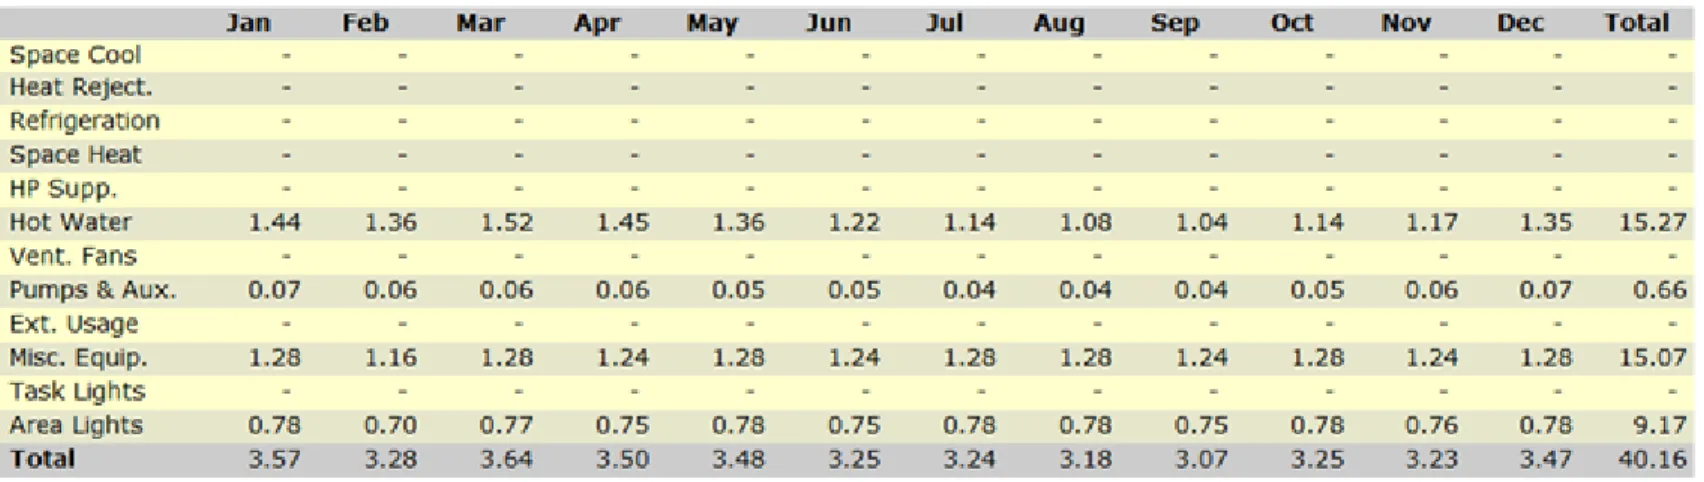 Table 4.1 Electric consumption per month (KwH*000) 